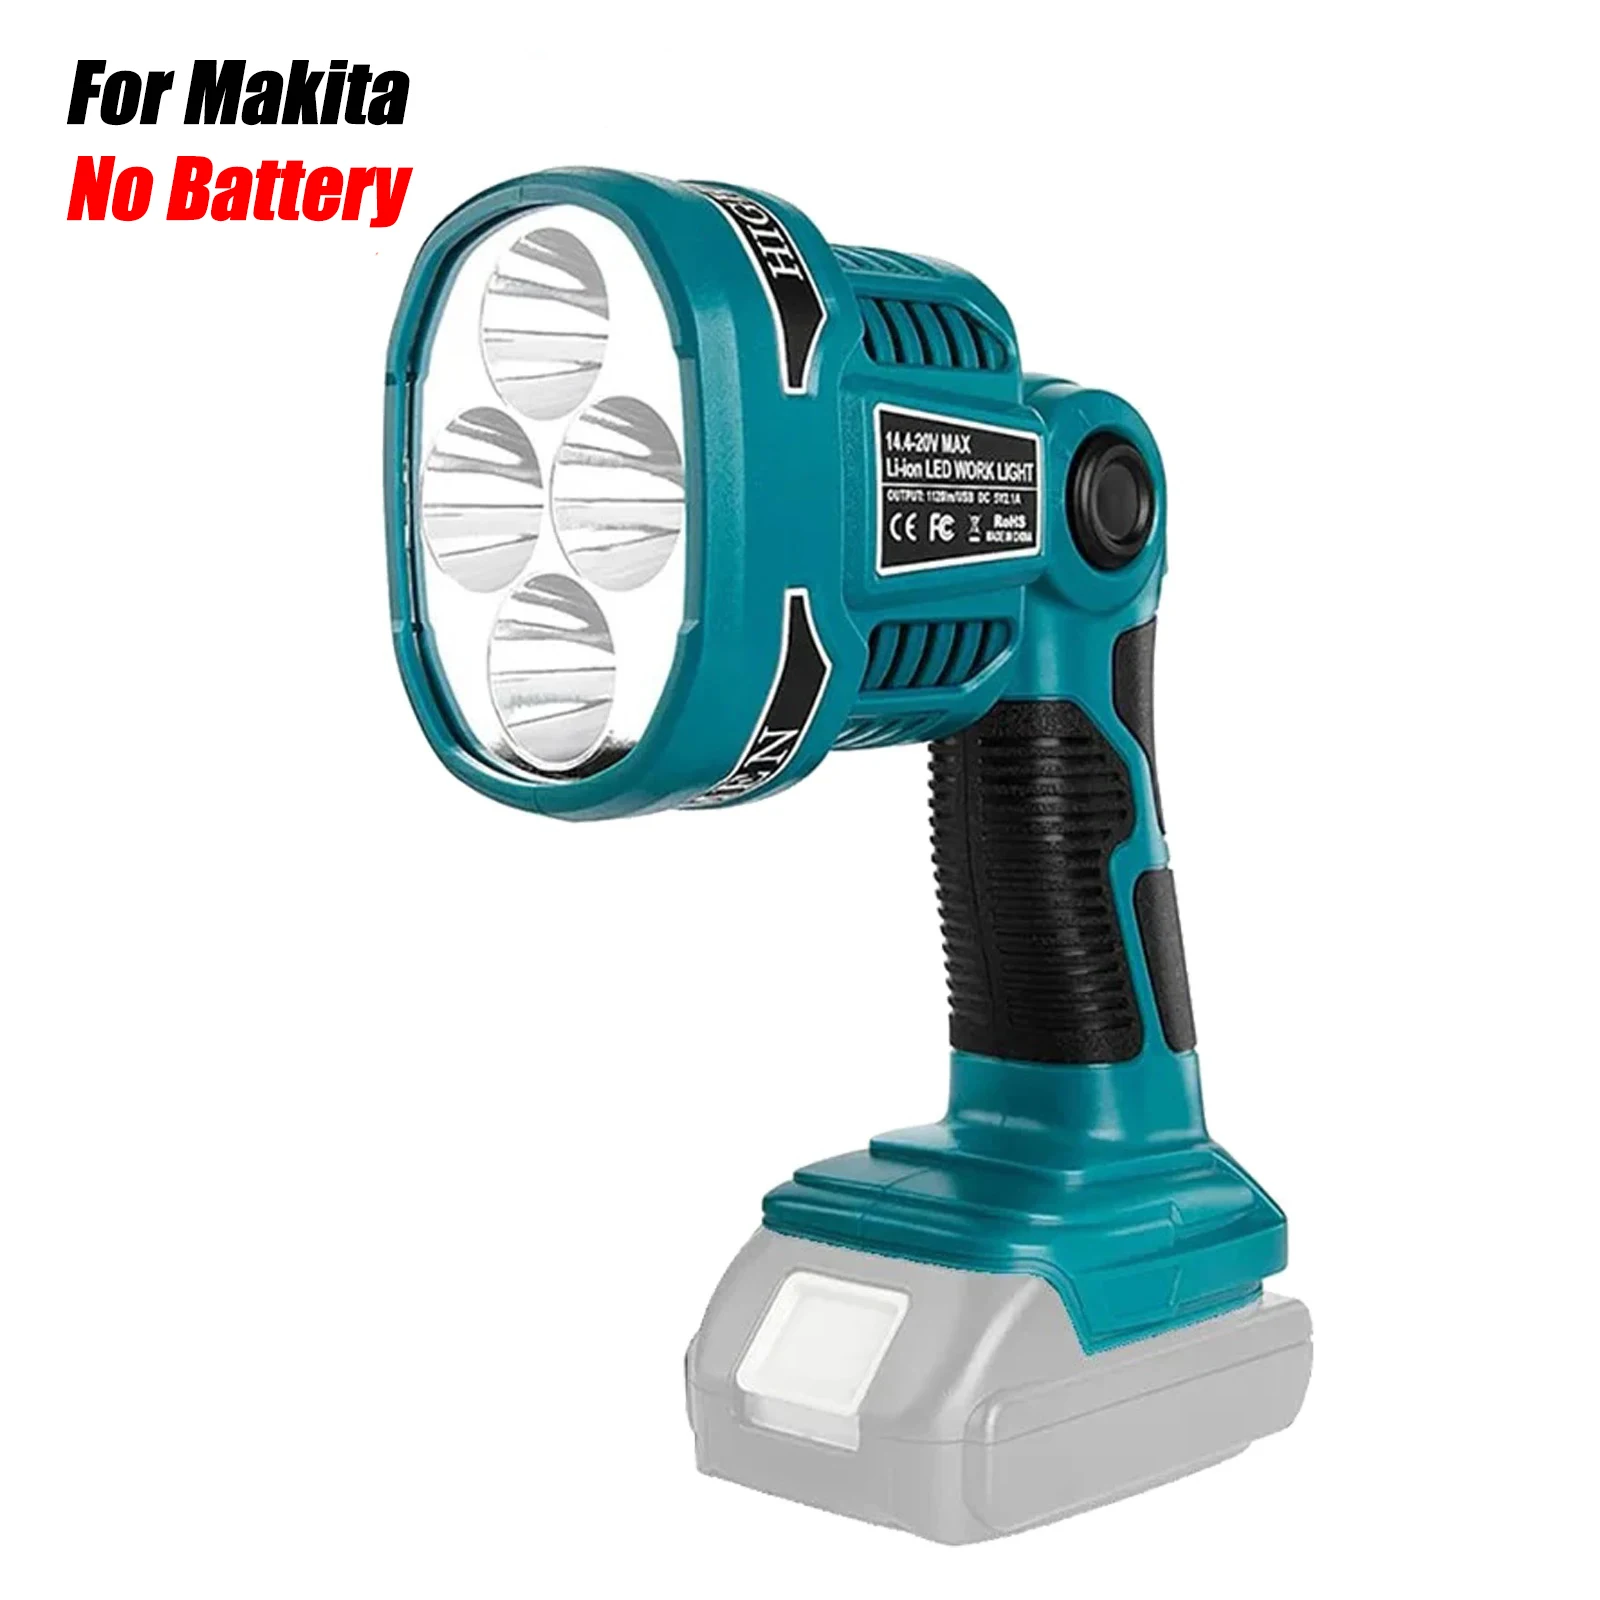 

9inches 12W 1120LM Cordless LED Work Light Lamp Outdoor Camping Portable Flashlight for Makita 14.4V-20V Li-ion Battery